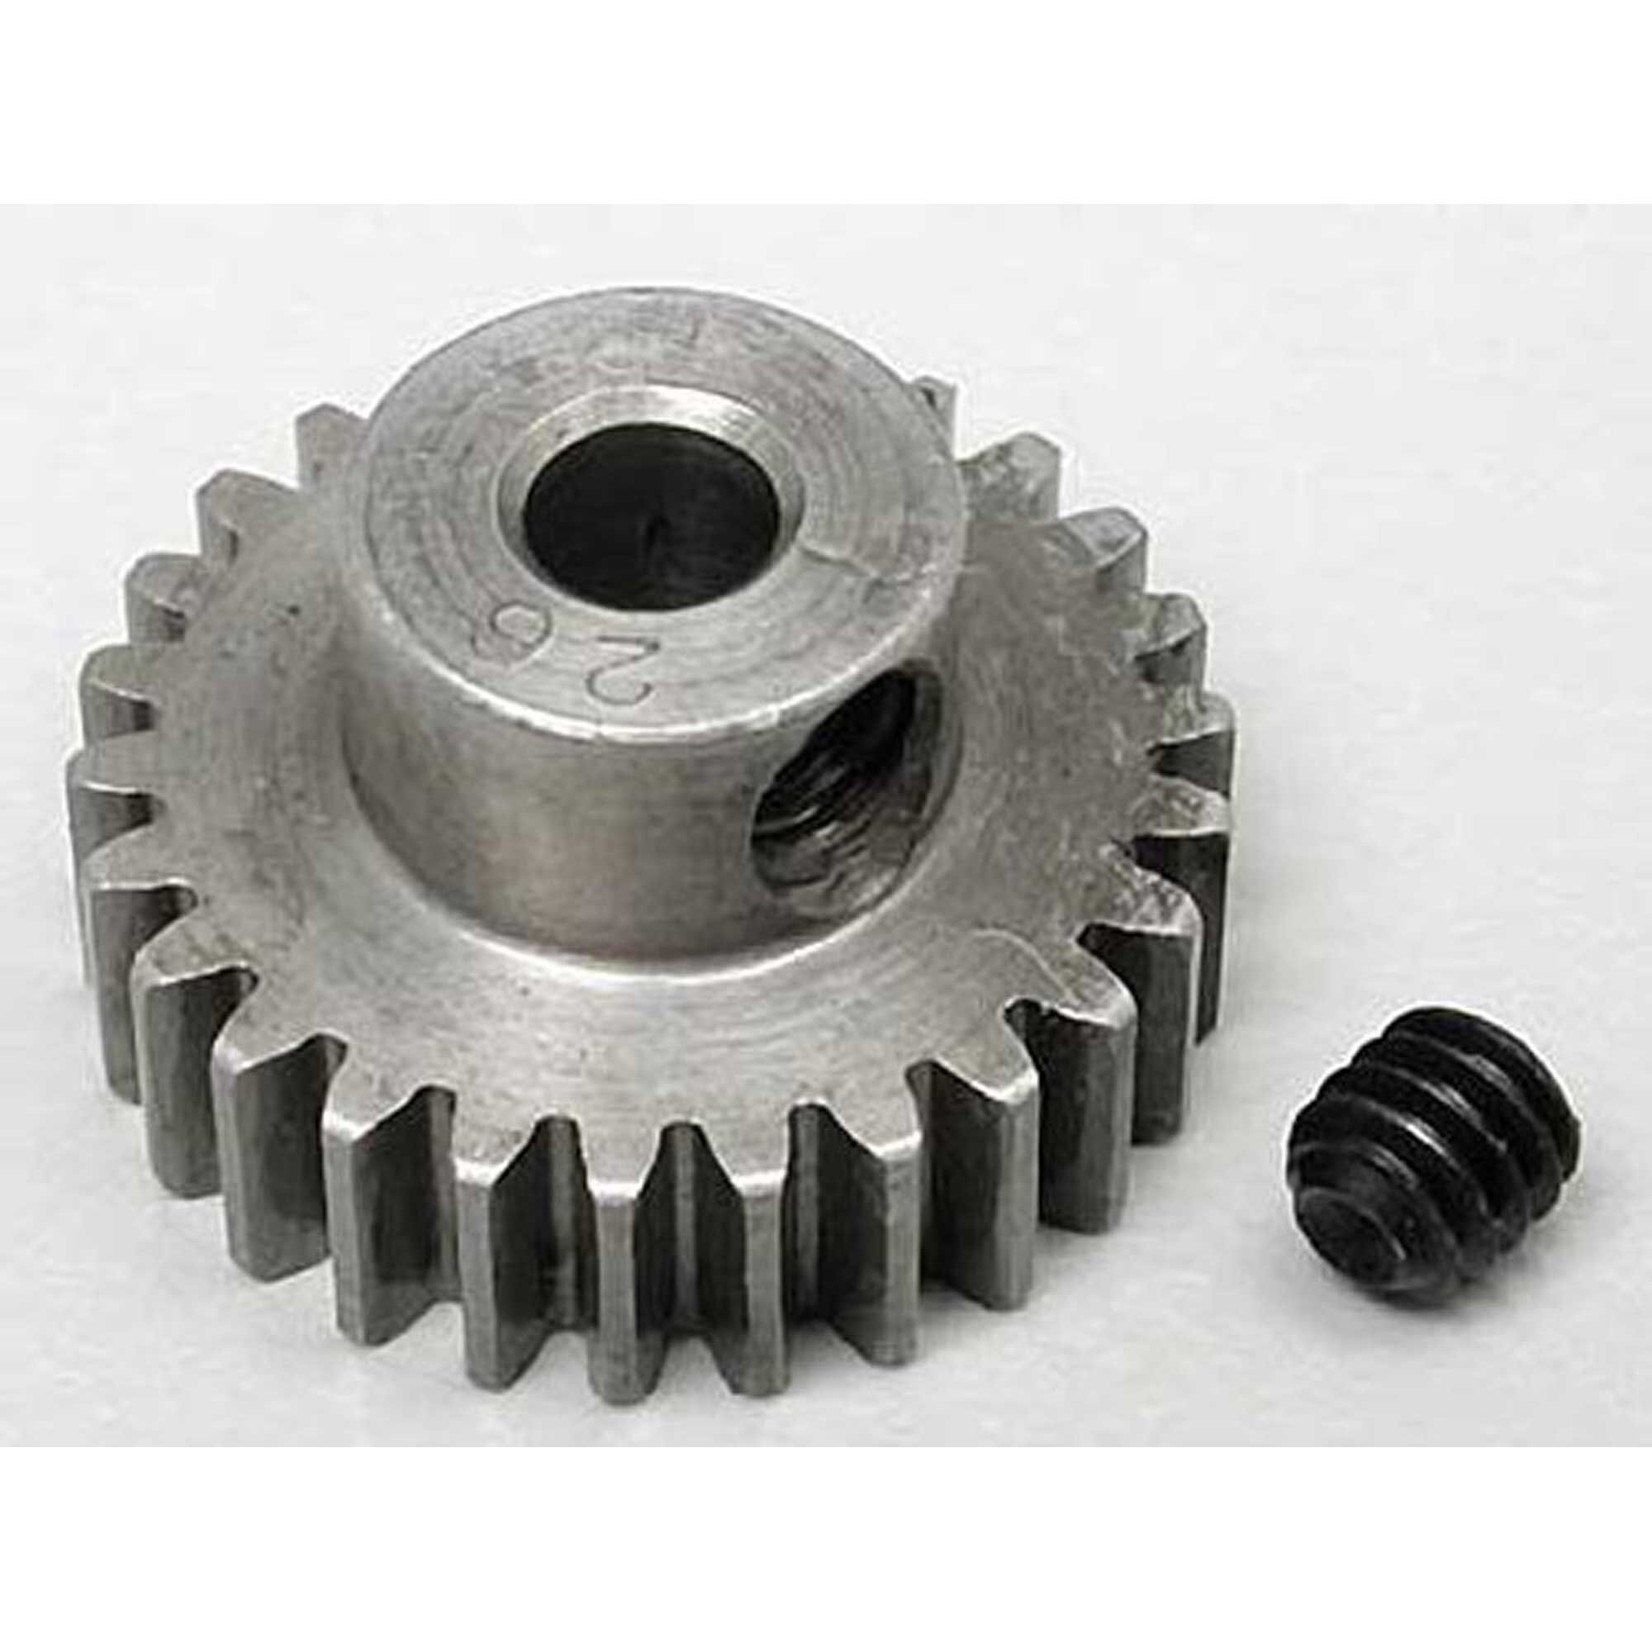 Robinson Racing Products (RRP) 48P Absolute Pinion, 26T